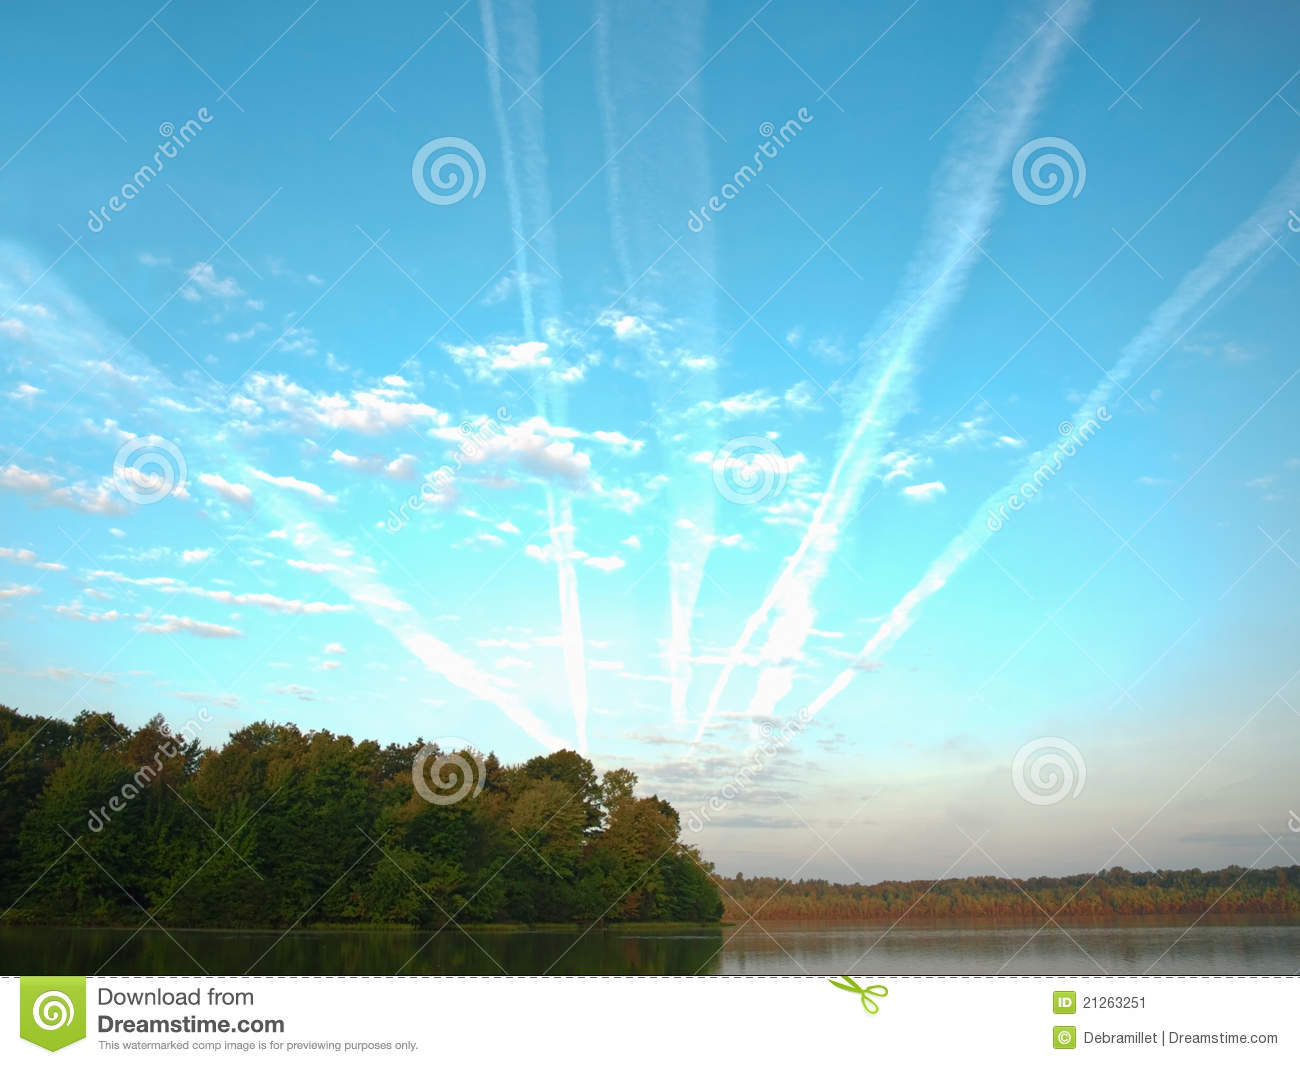 More Similar Stock Images Of   Aircraft Trails